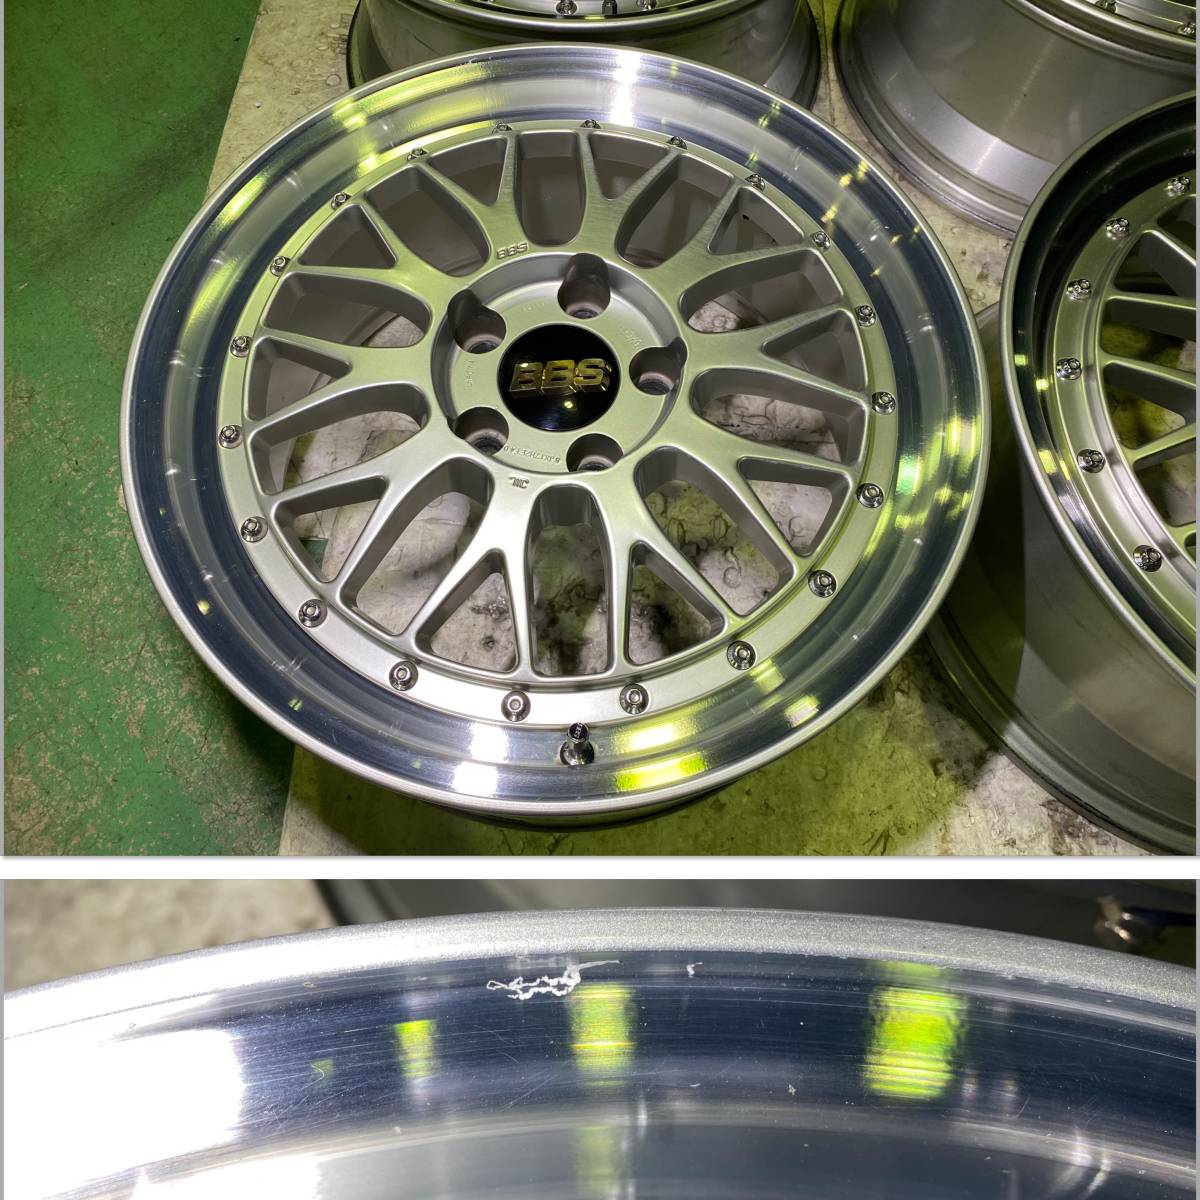 軽量 鍛造 BBS LM 17インチ LMP074 8J +40 5H PCD114.3 4本 FORGED 